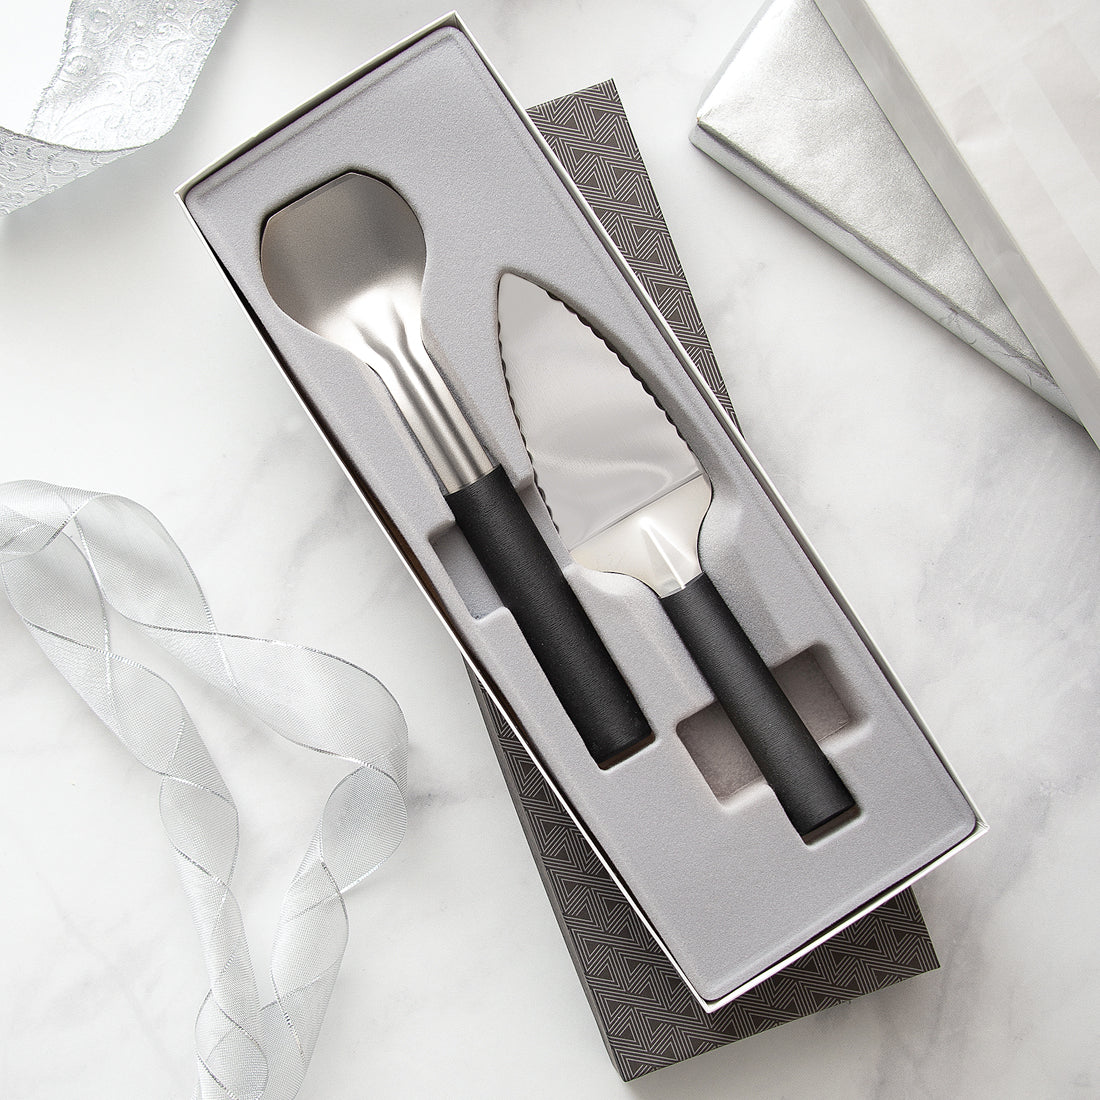 Rada Cutlery Pie A'La Mode Gift Set with silver handles in a gift box